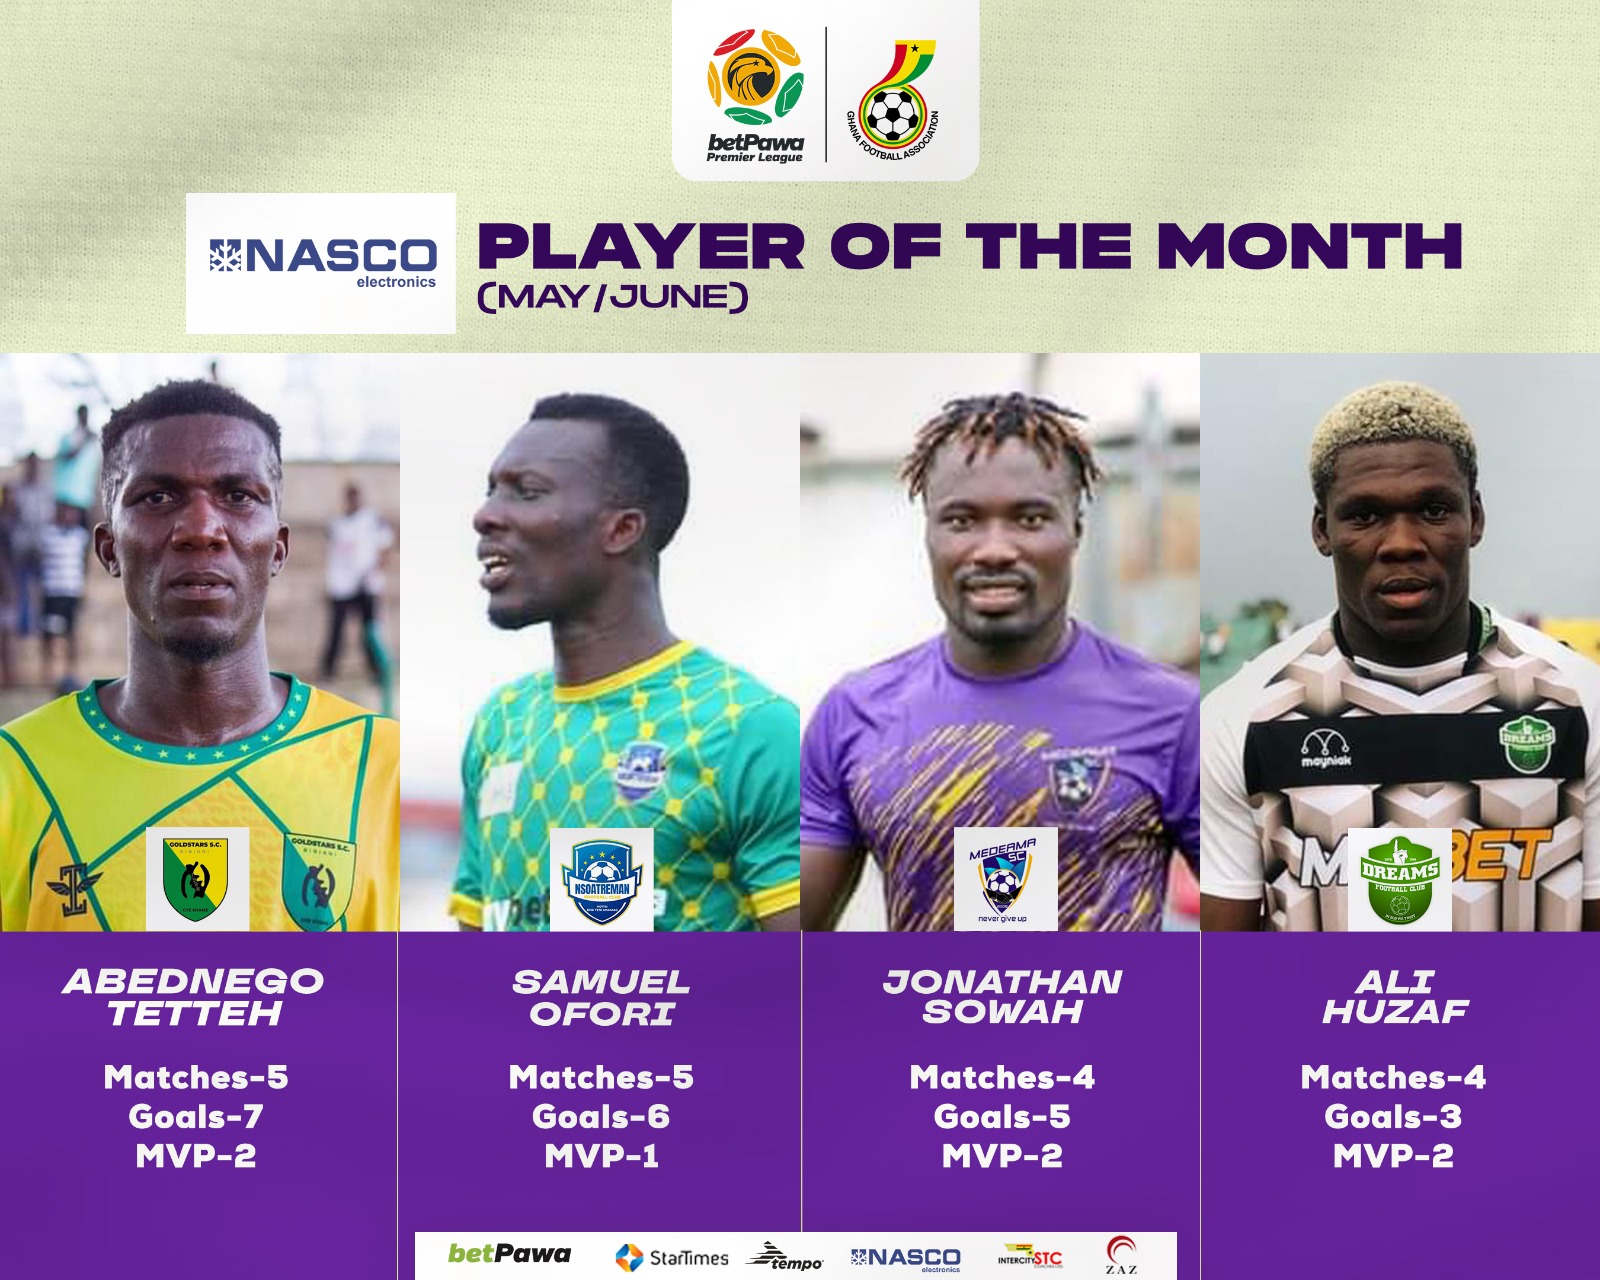 Shortlist for NASCO Player of the Month for May/June announced